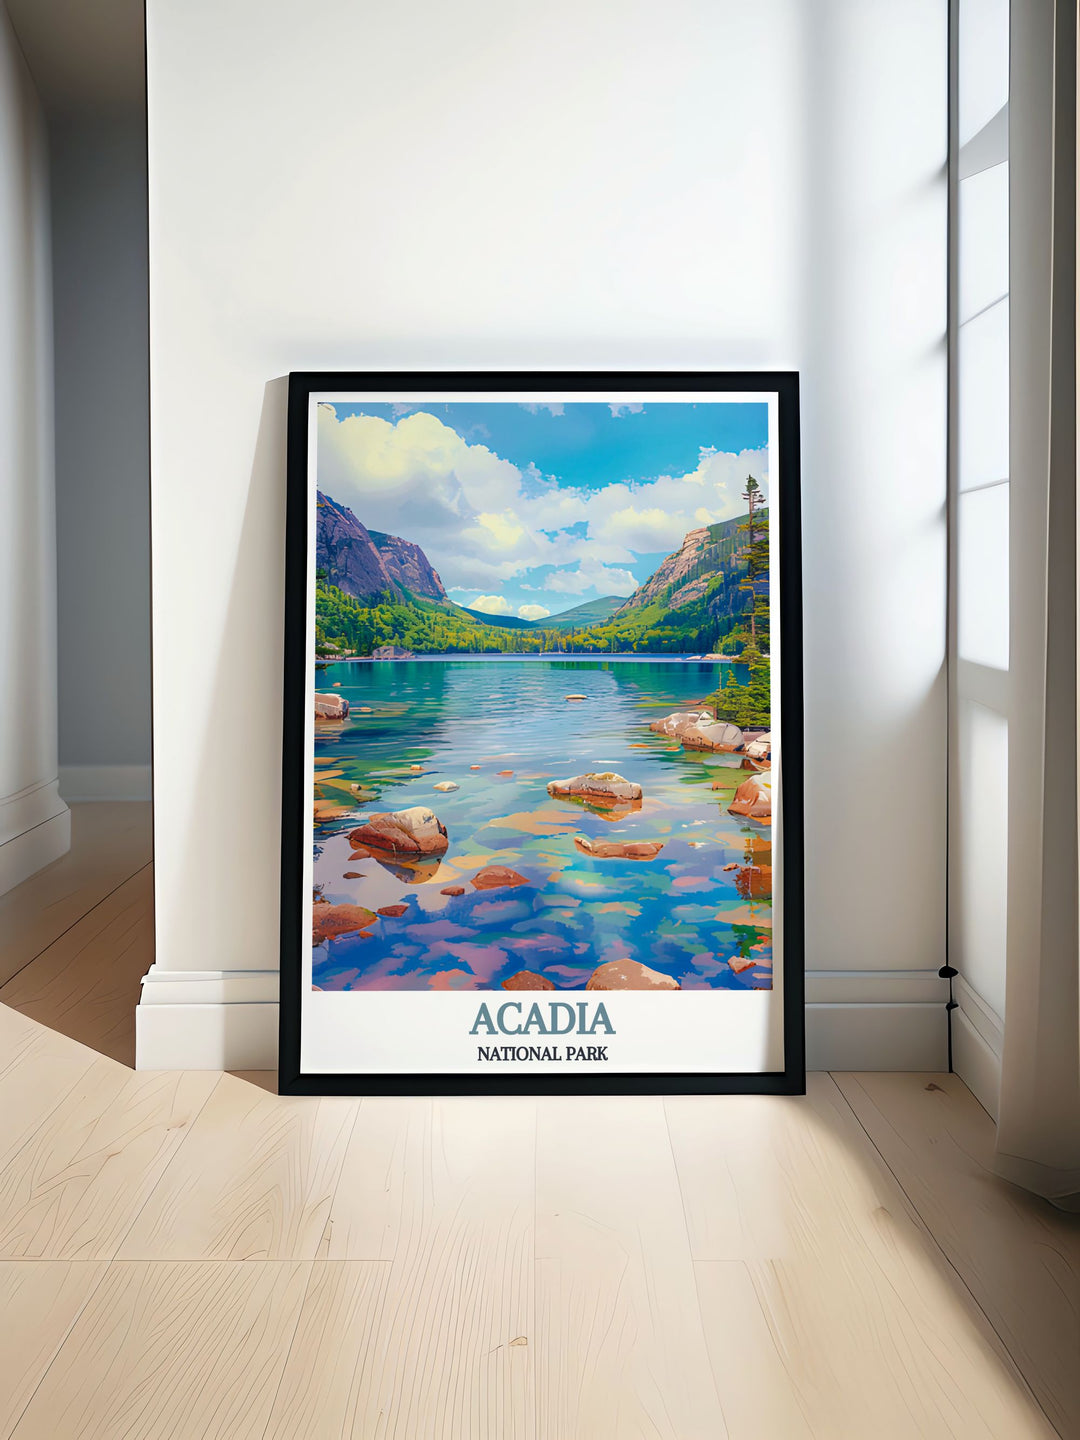 Acadia National Park print showcasing the tranquil beauty of Jordan Pond perfect for nature lovers who appreciate national park wall art and vintage travel posters ideal for enhancing home decor with a touch of natural serenity and timeless charm.